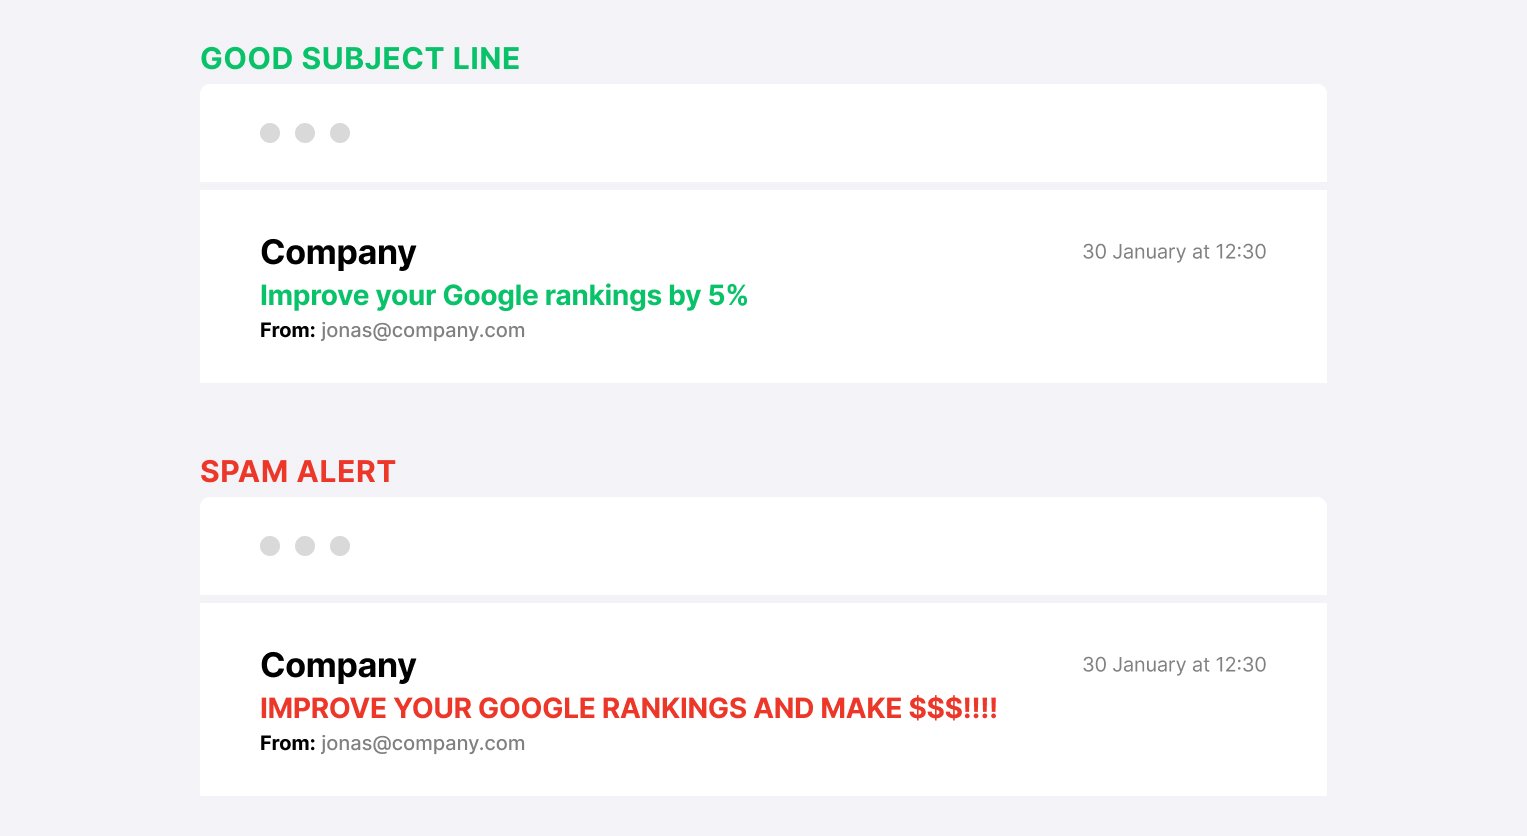 email subject line comparison between good and spammy - MailerLite